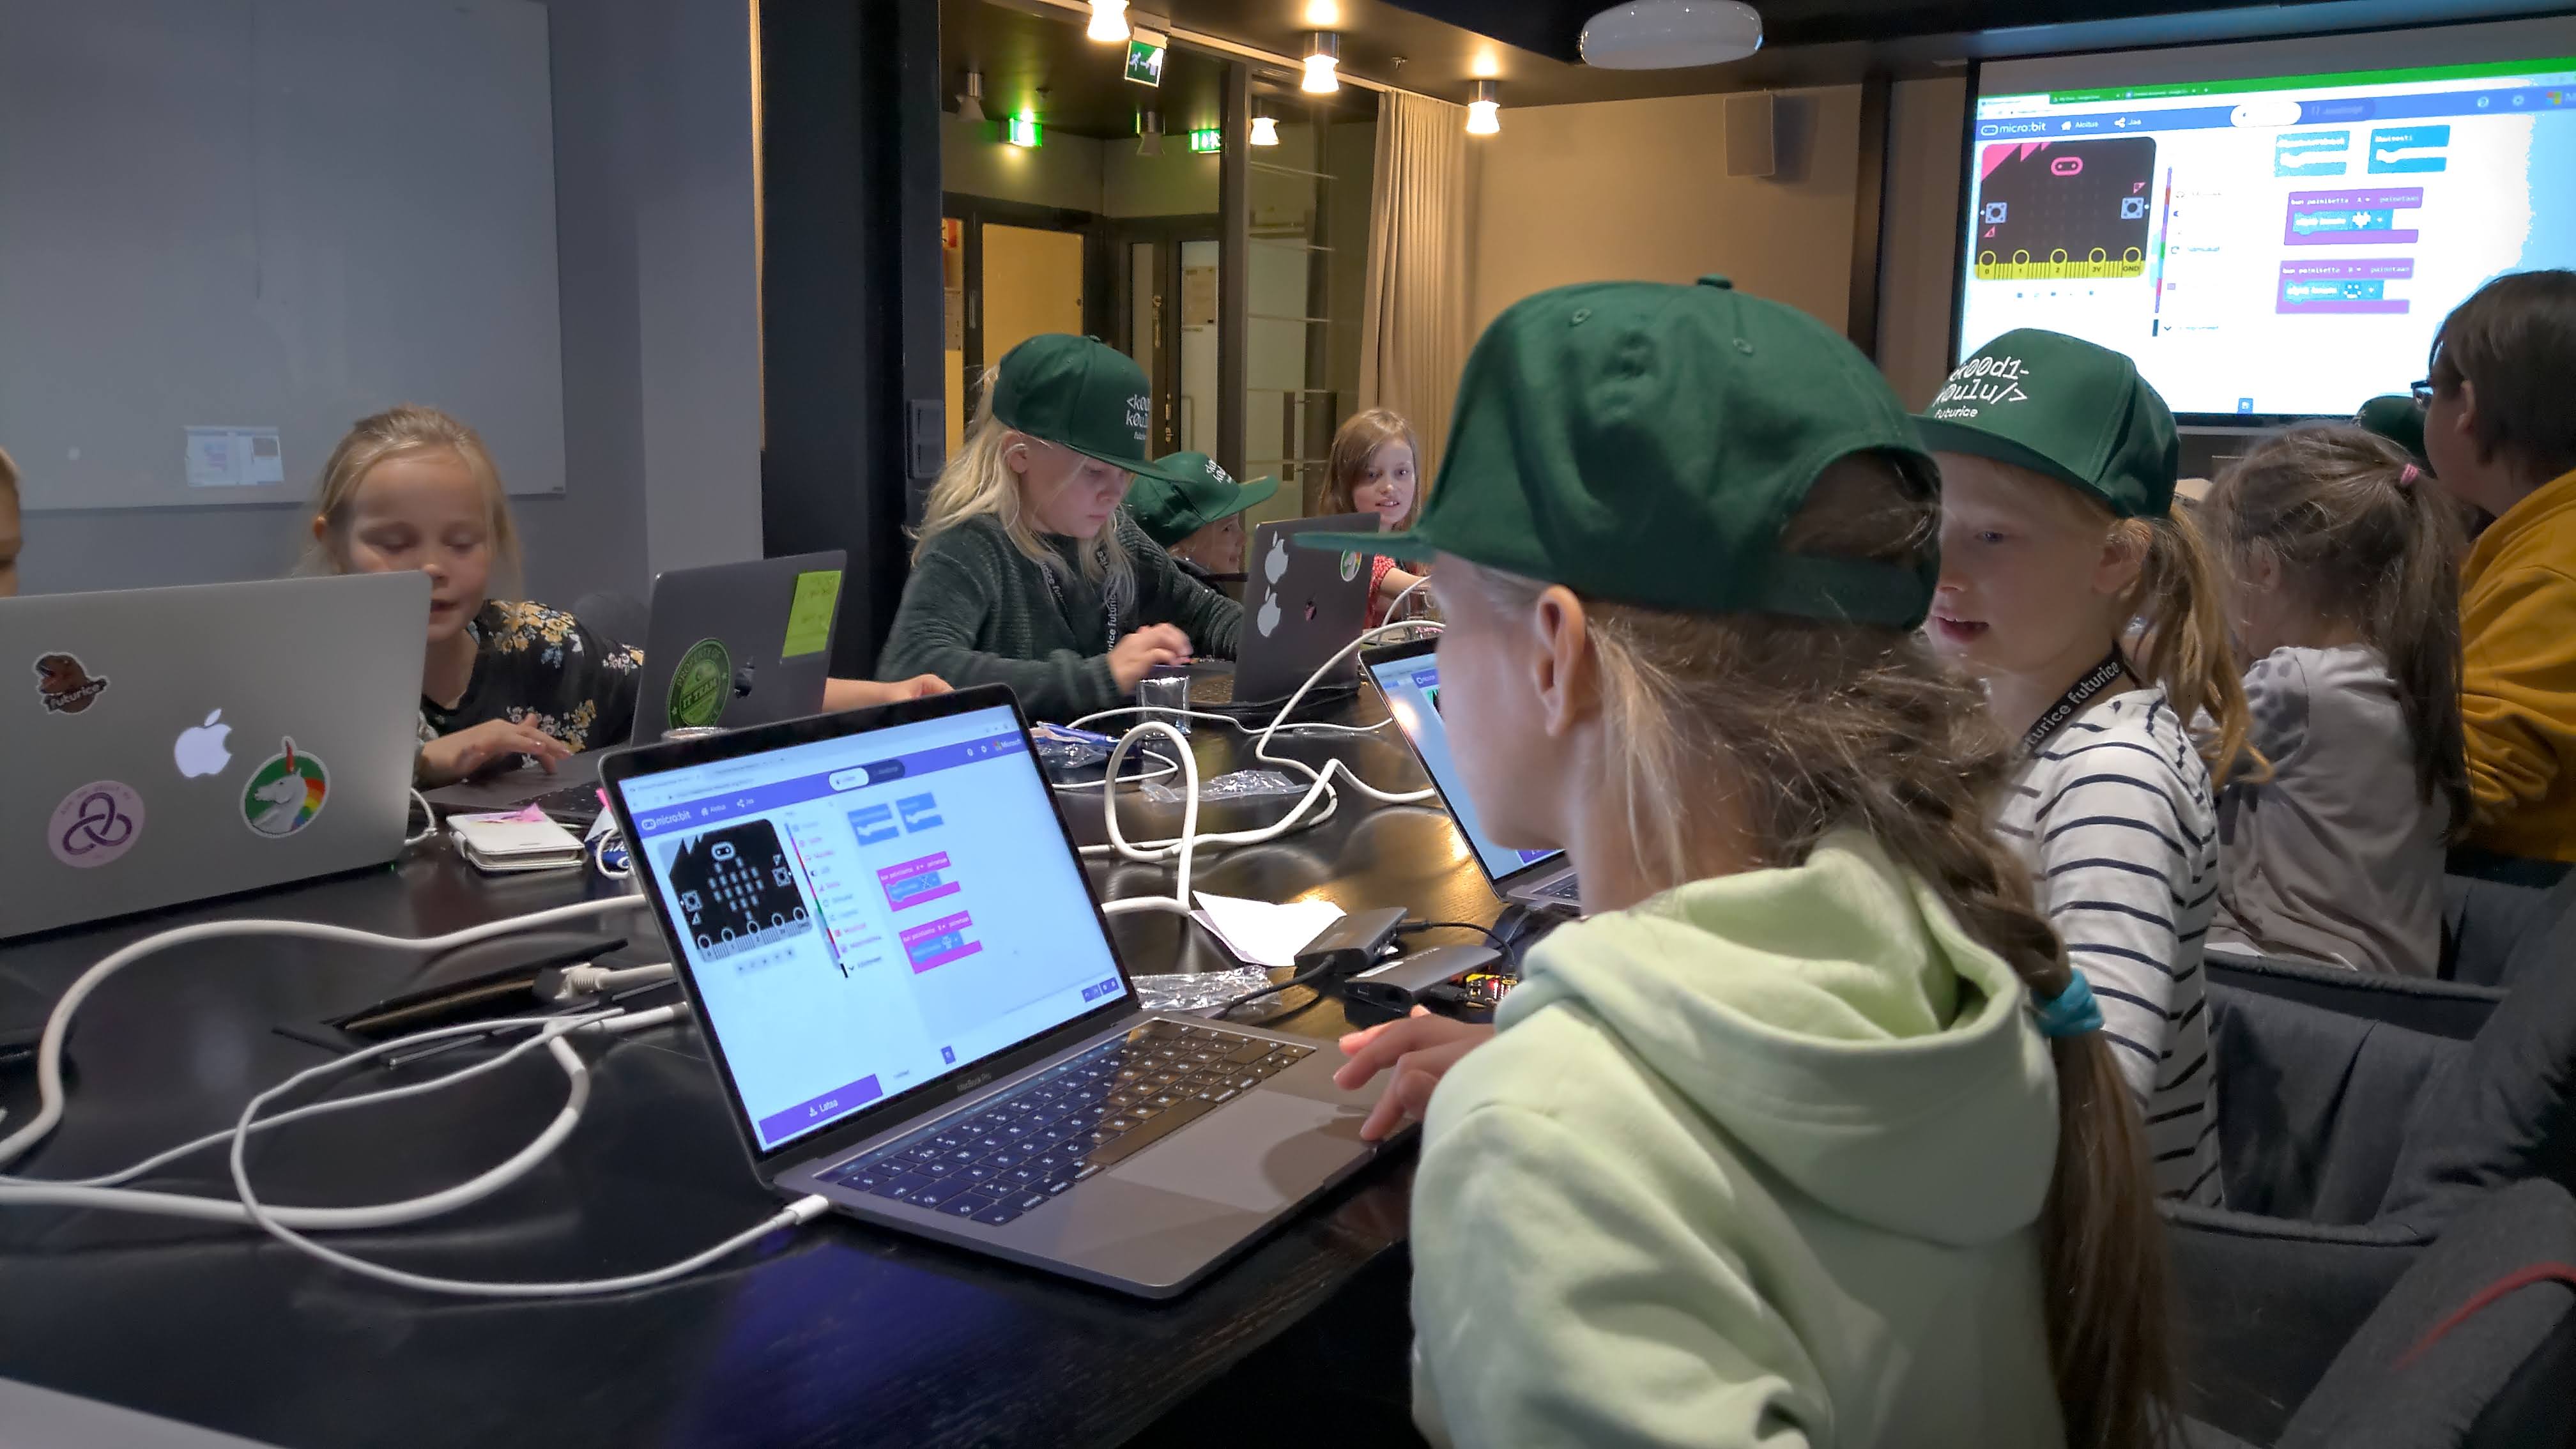 A group of children with green caps sitting in a meeting room working with laptops